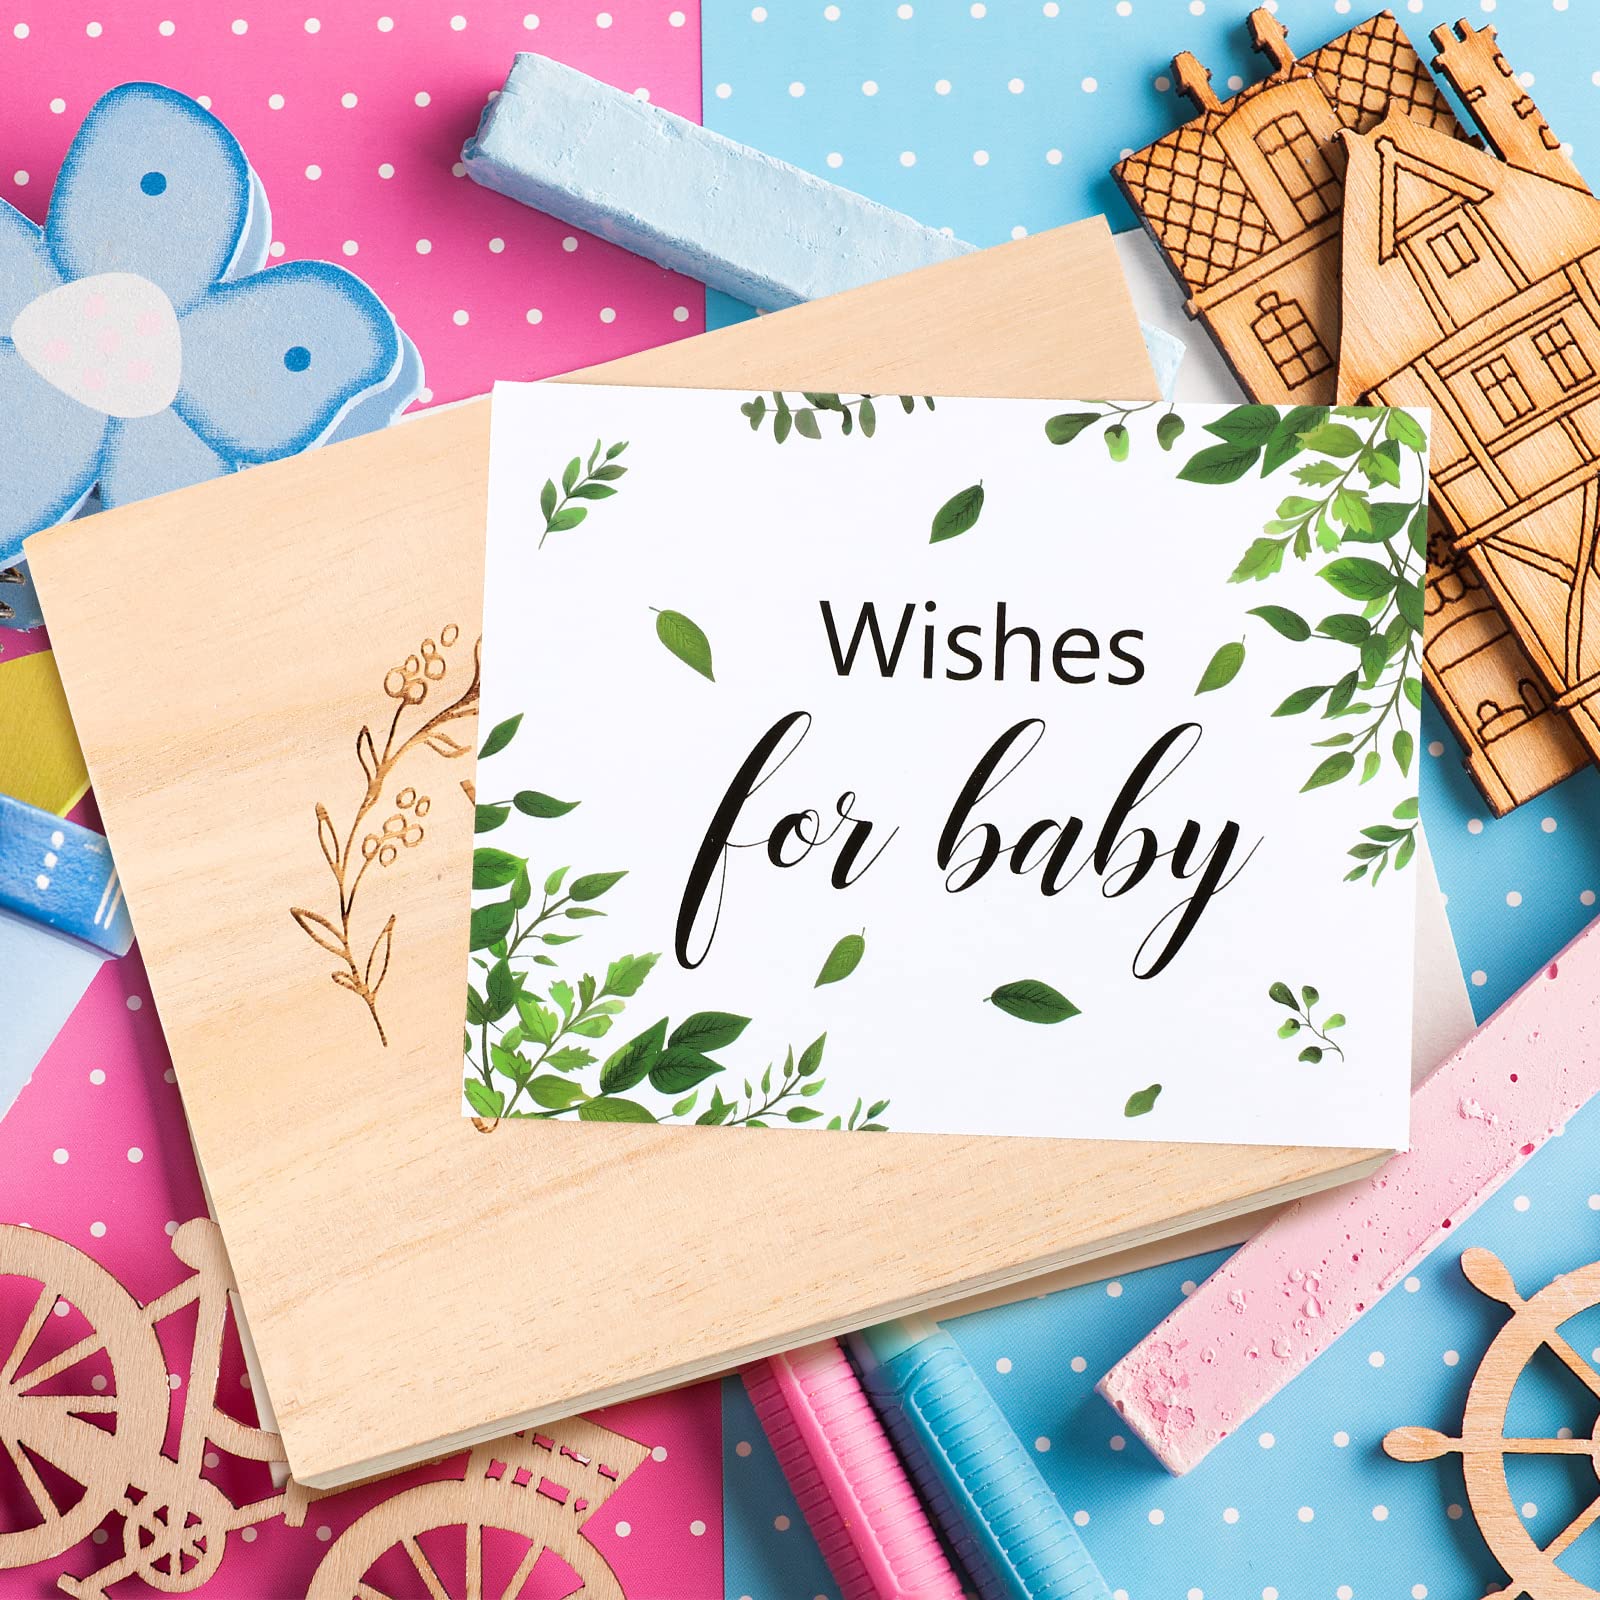 Set of 50 Botanical Baby Shower Advice Cards and Wooden Keepsake Box, Greenery Baby Advice Cards for Baby Shower Double Sided Advice and Wishes Cards for Boys Girls Baby Showers Wedding Gender Reveal